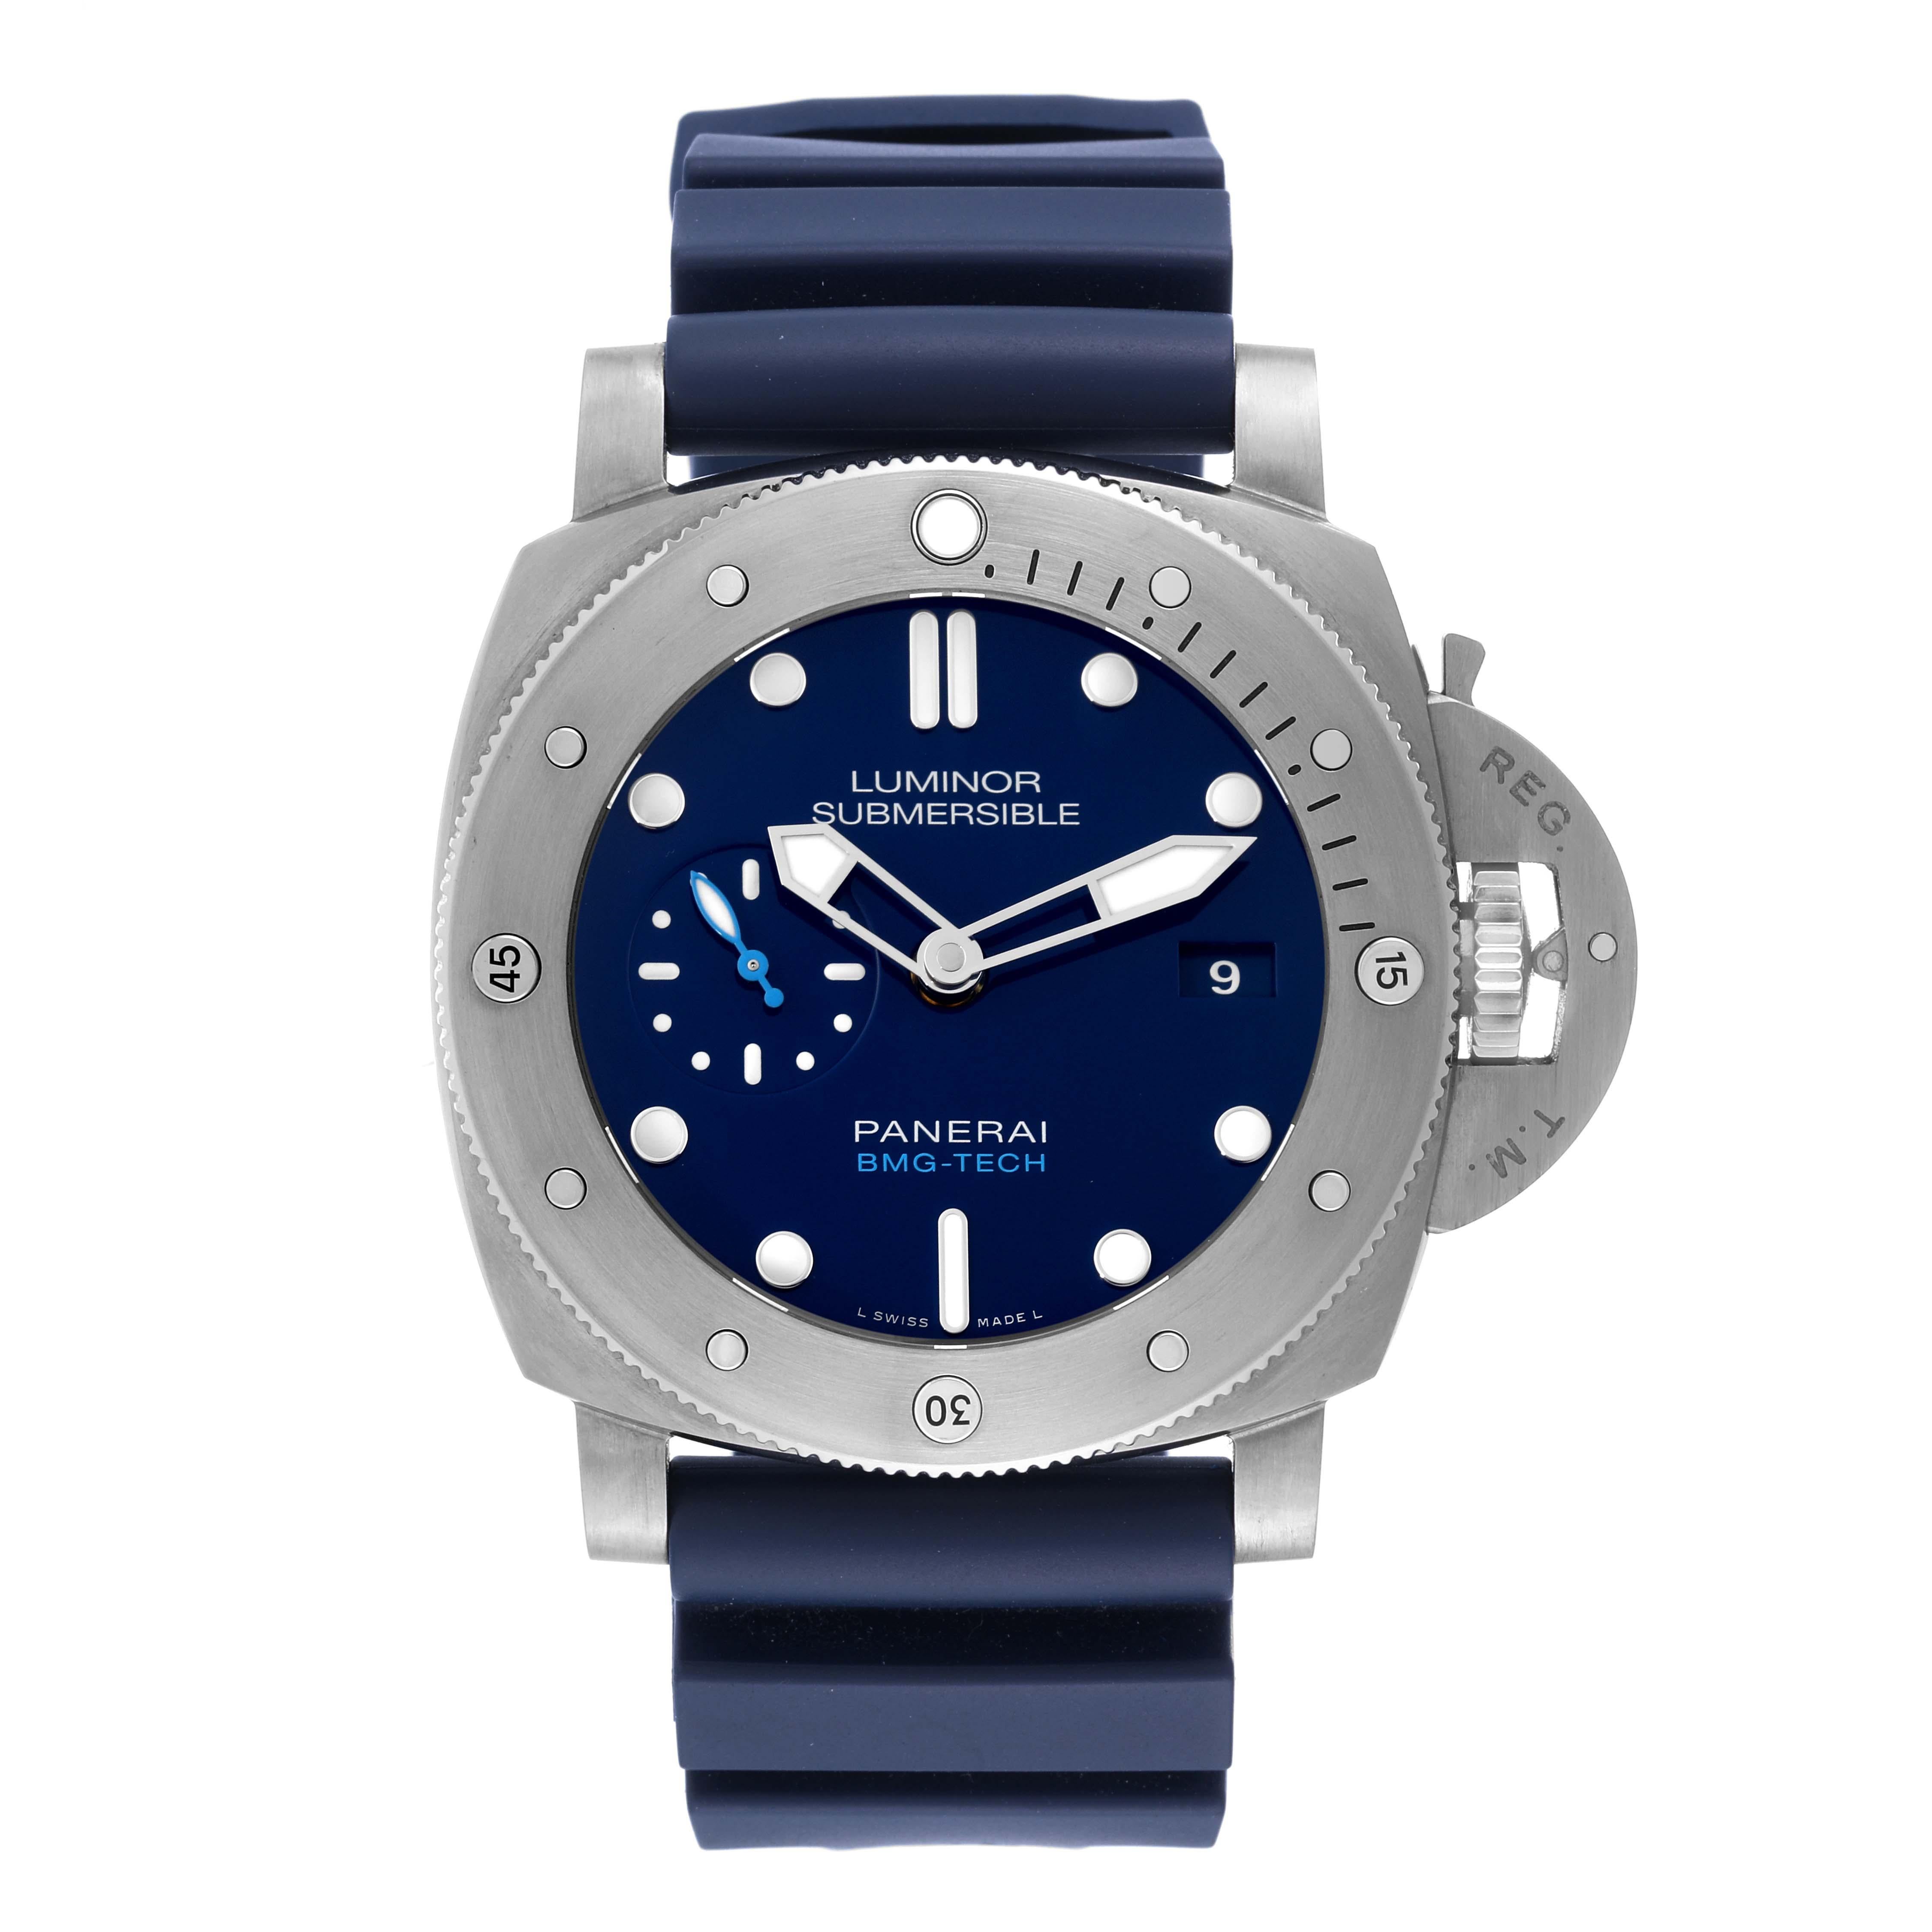 Panerai Submersible BMG-TECH Blue Dial Mens Watch PAM00692 Box Papers 1